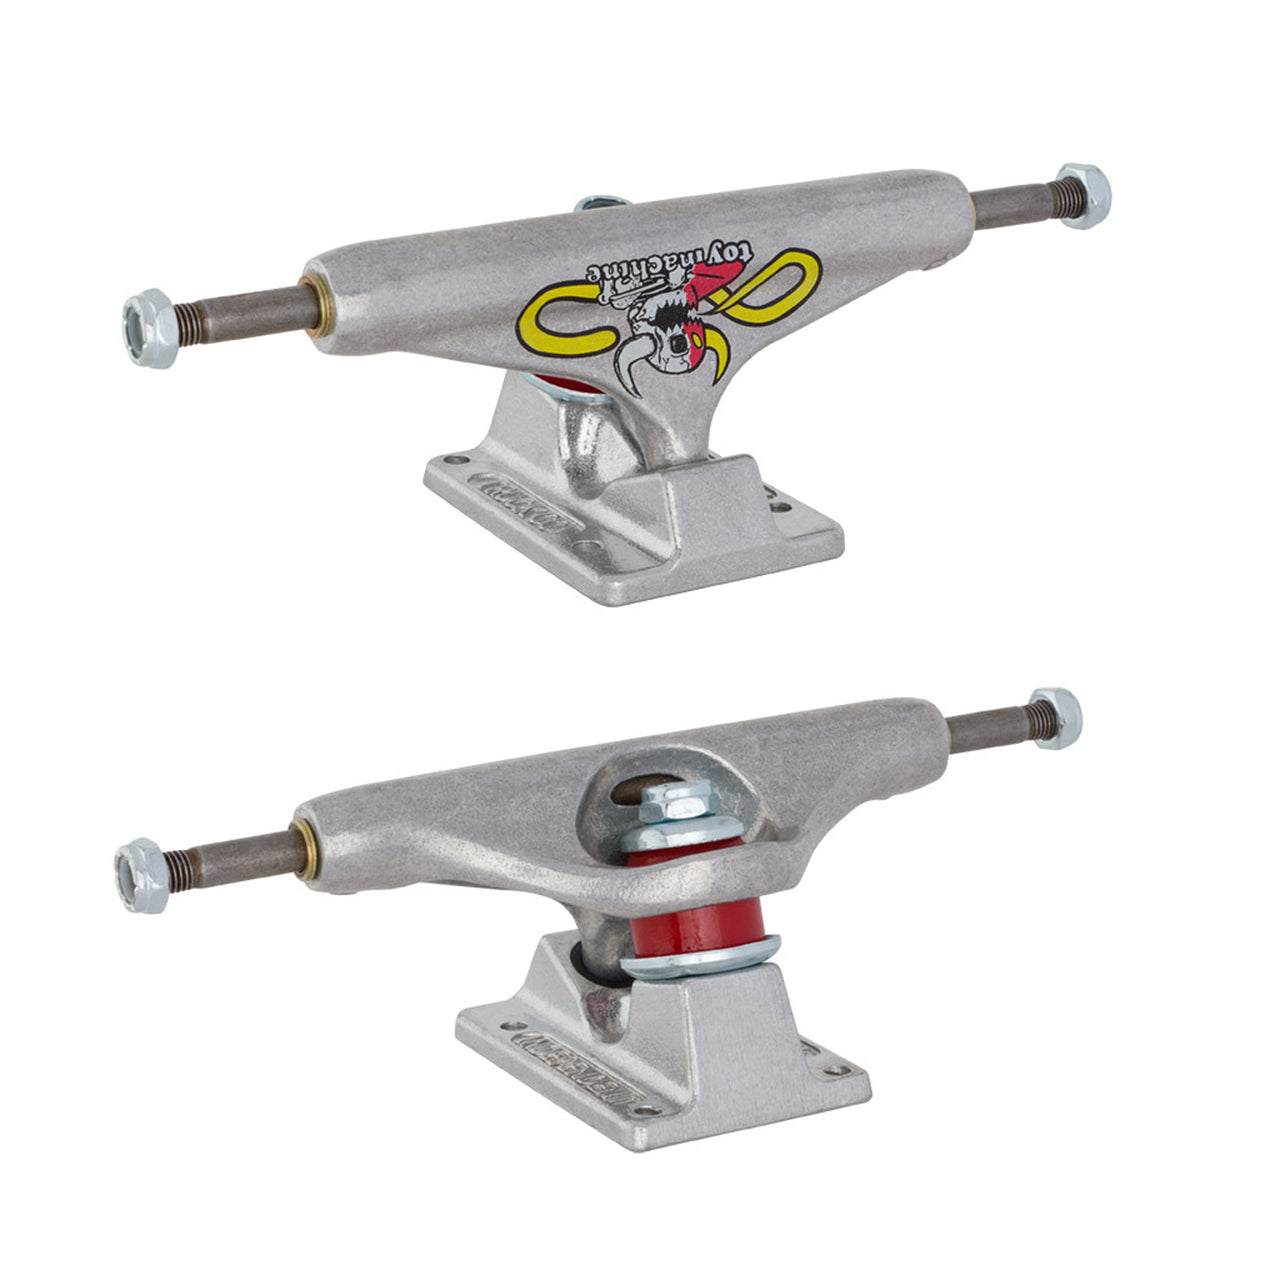 Stage 11 Toy Machine Standard Trucks (size options listed)